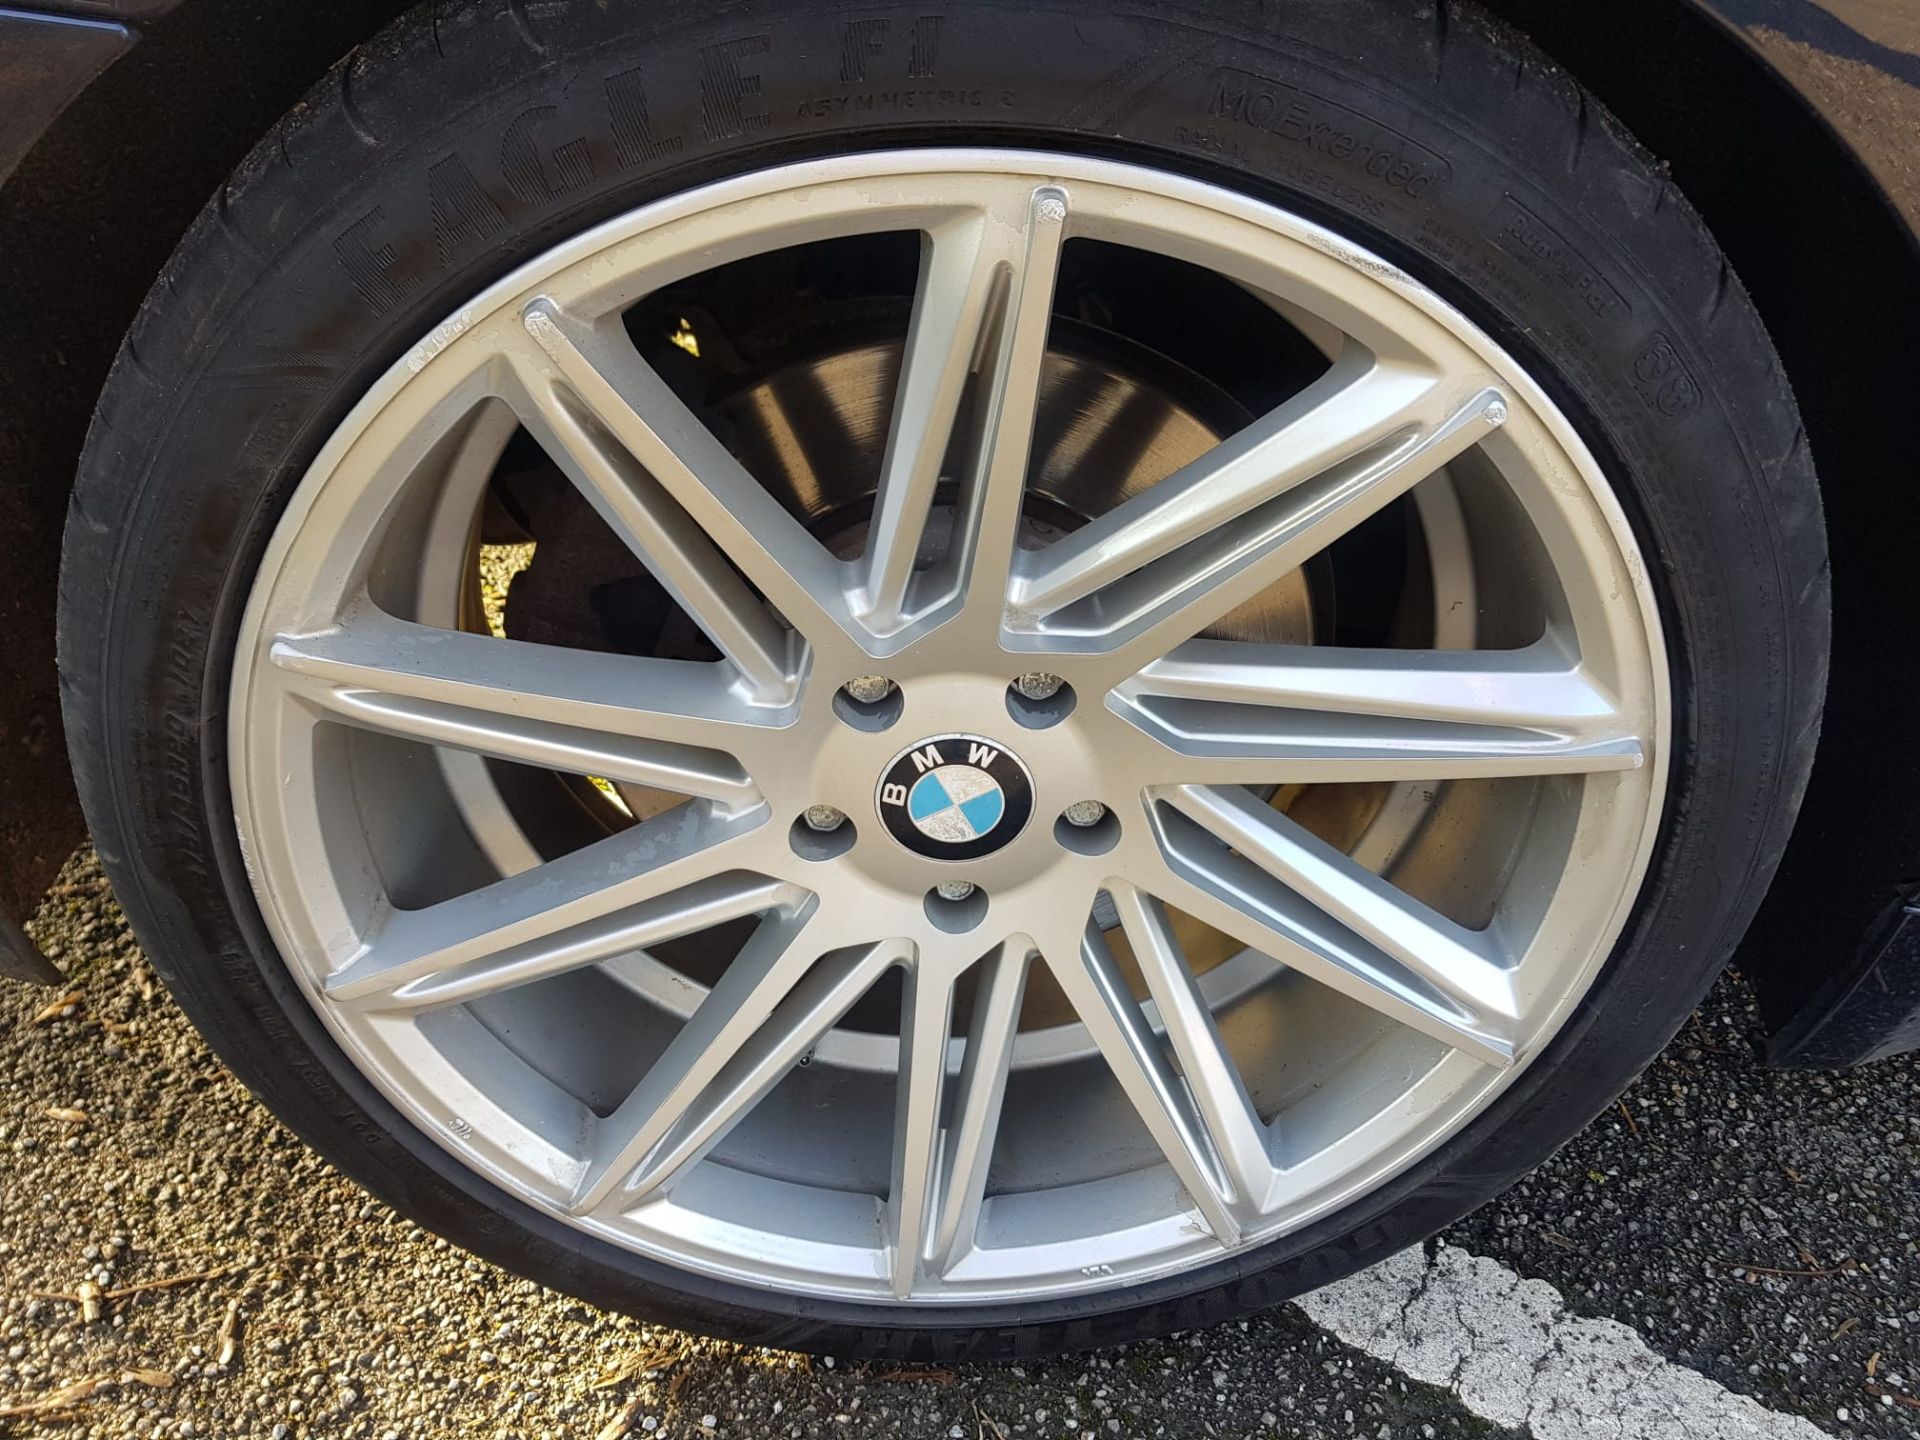 2014 730D M-SPORT SALOON - FULL SERVICE HISTORY - 115K MILES - Image 15 of 43